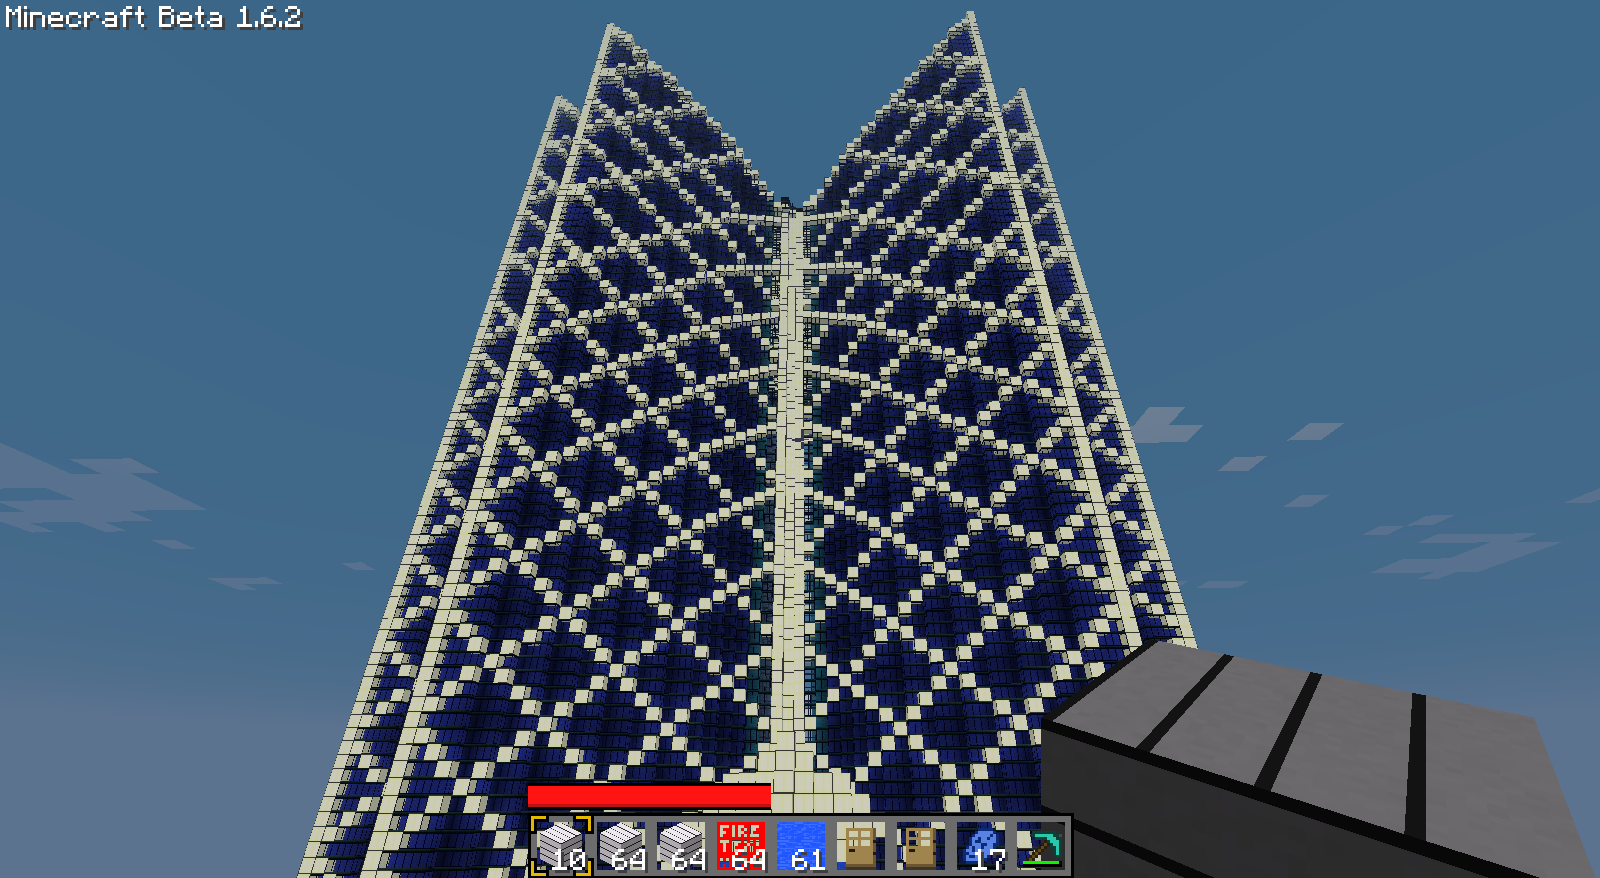 Cool Minecraft Skyscrapers cool minecraft skyscrapers for pinterest